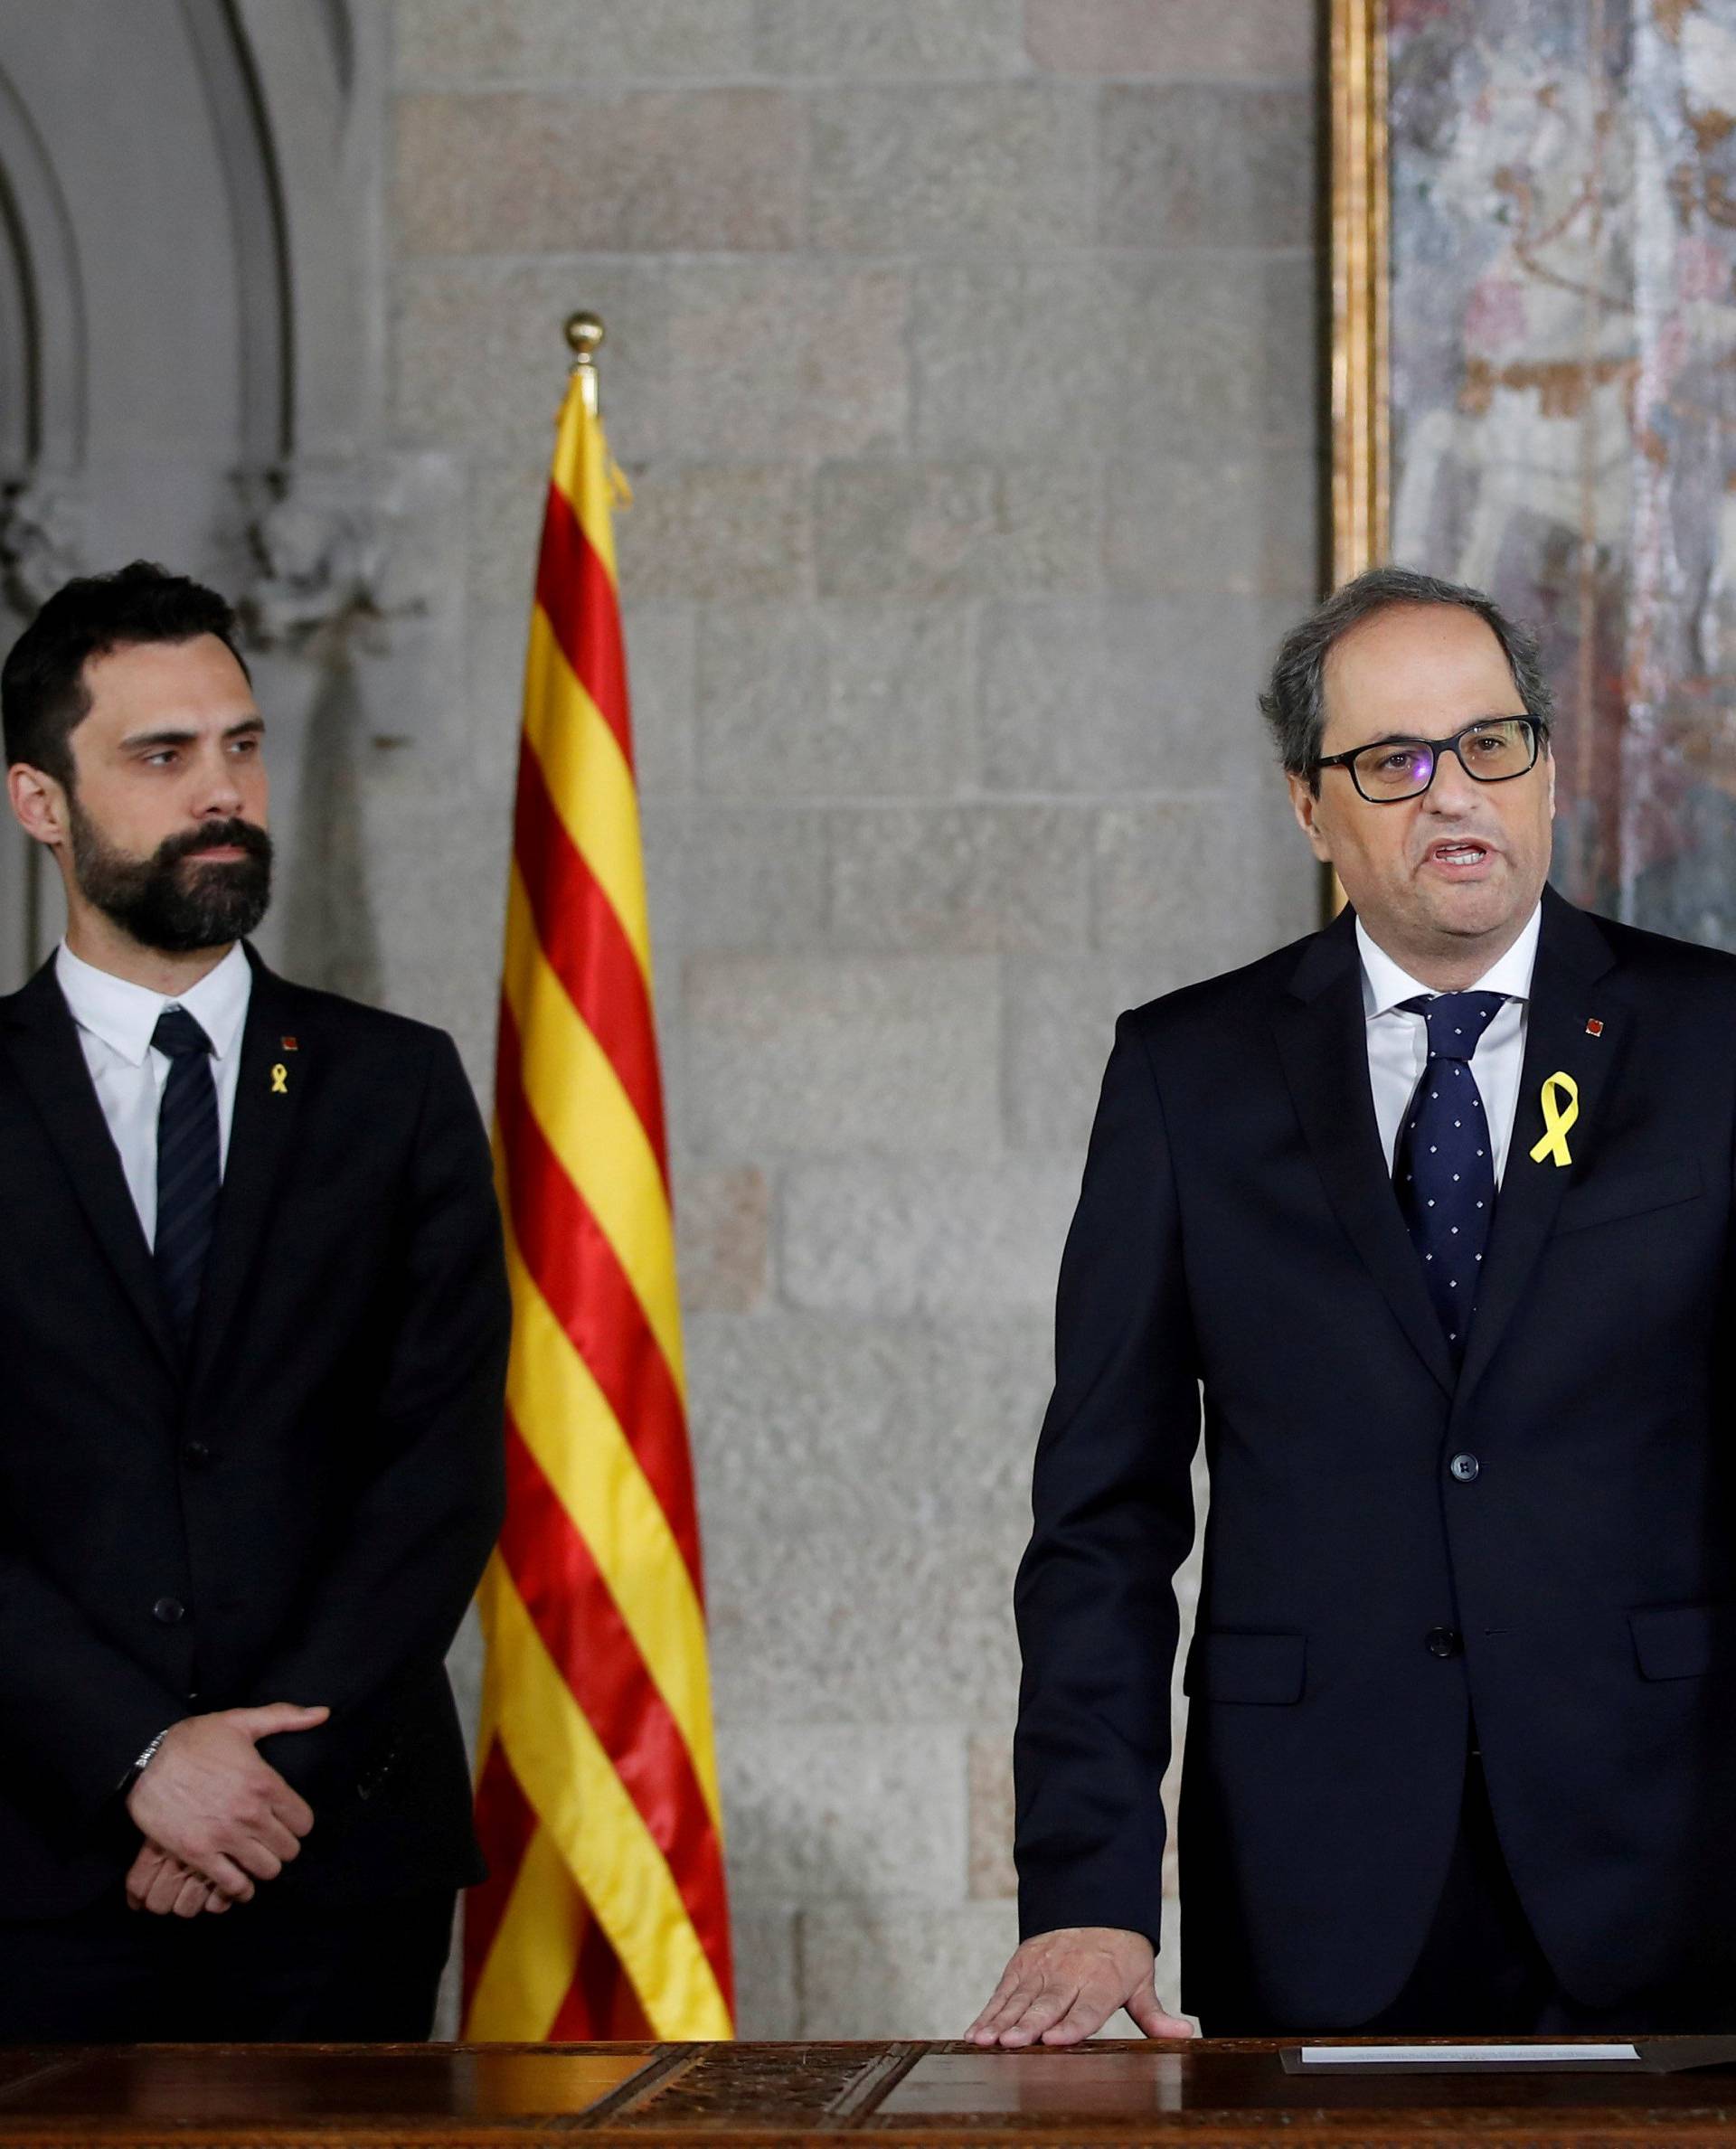 Quim Torra takes his oath as new Catalan Regional President next to regional parliament speaker Roger Torrent during a ceremony at Generalitat Palace in Barcelona